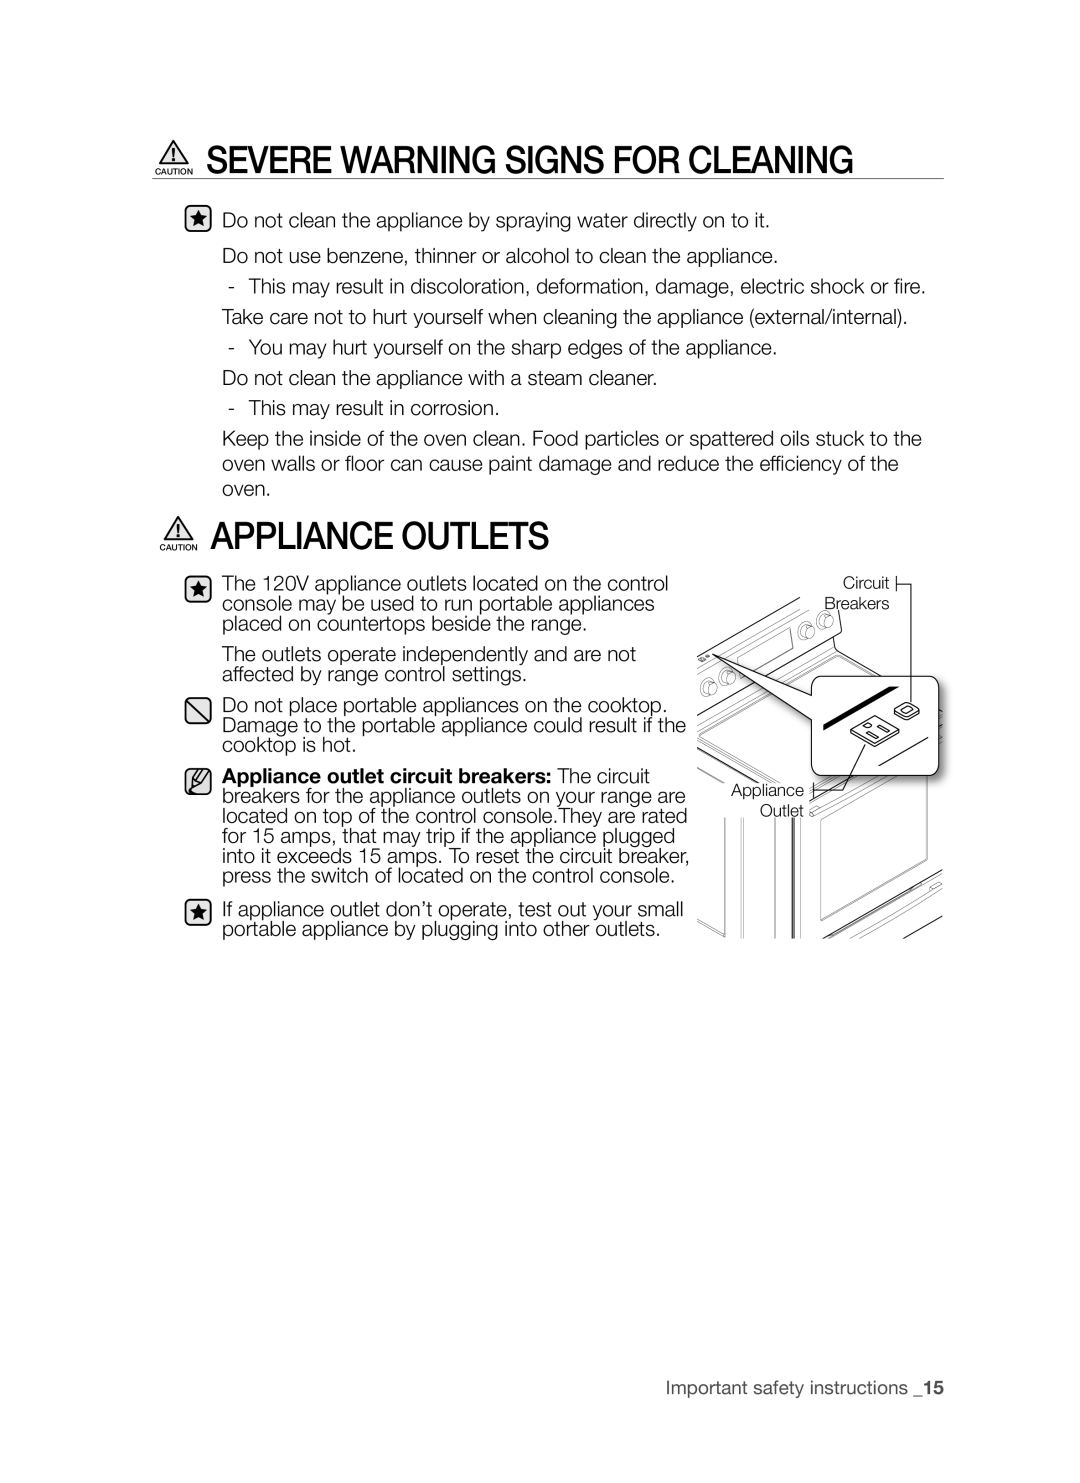 Samsung FE-R500WW user manual Caution Severe Warning Signs For Cleaning, Caution Appliance Outlets 